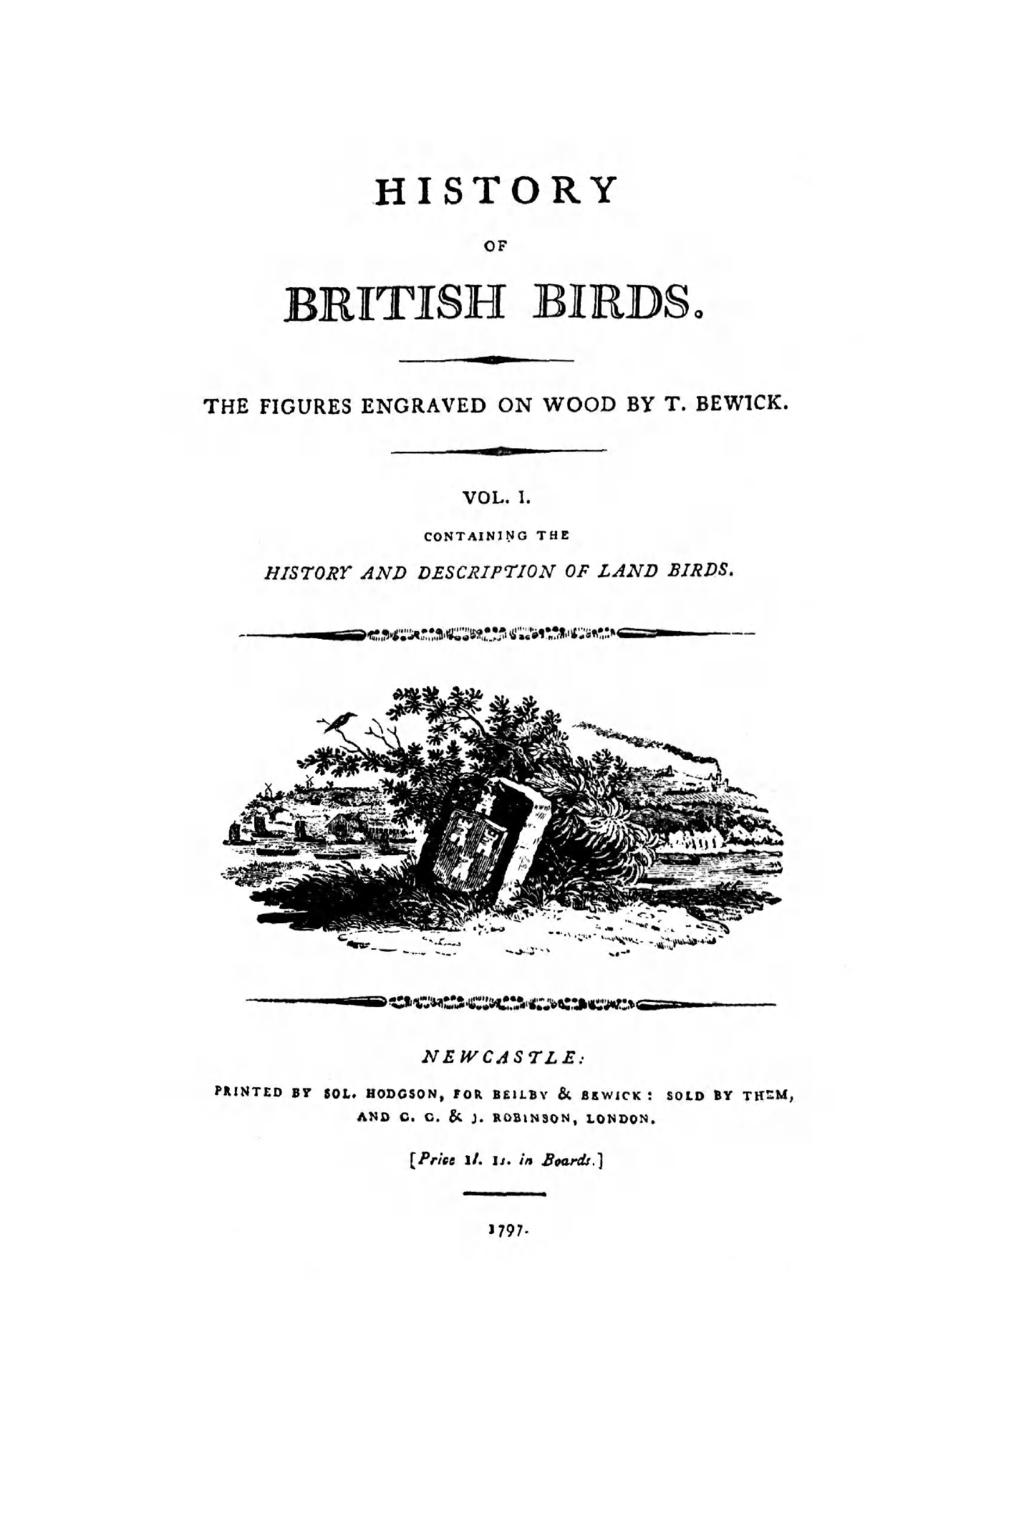 HISTORY OF BRITISH BIRDS. THE FIGURES ENGRAVED ON WOOD BY T. BEWICK. VOL. I. CONTAINING THE HISTORY AND DESCRIPTION OF LAND BIRDS.